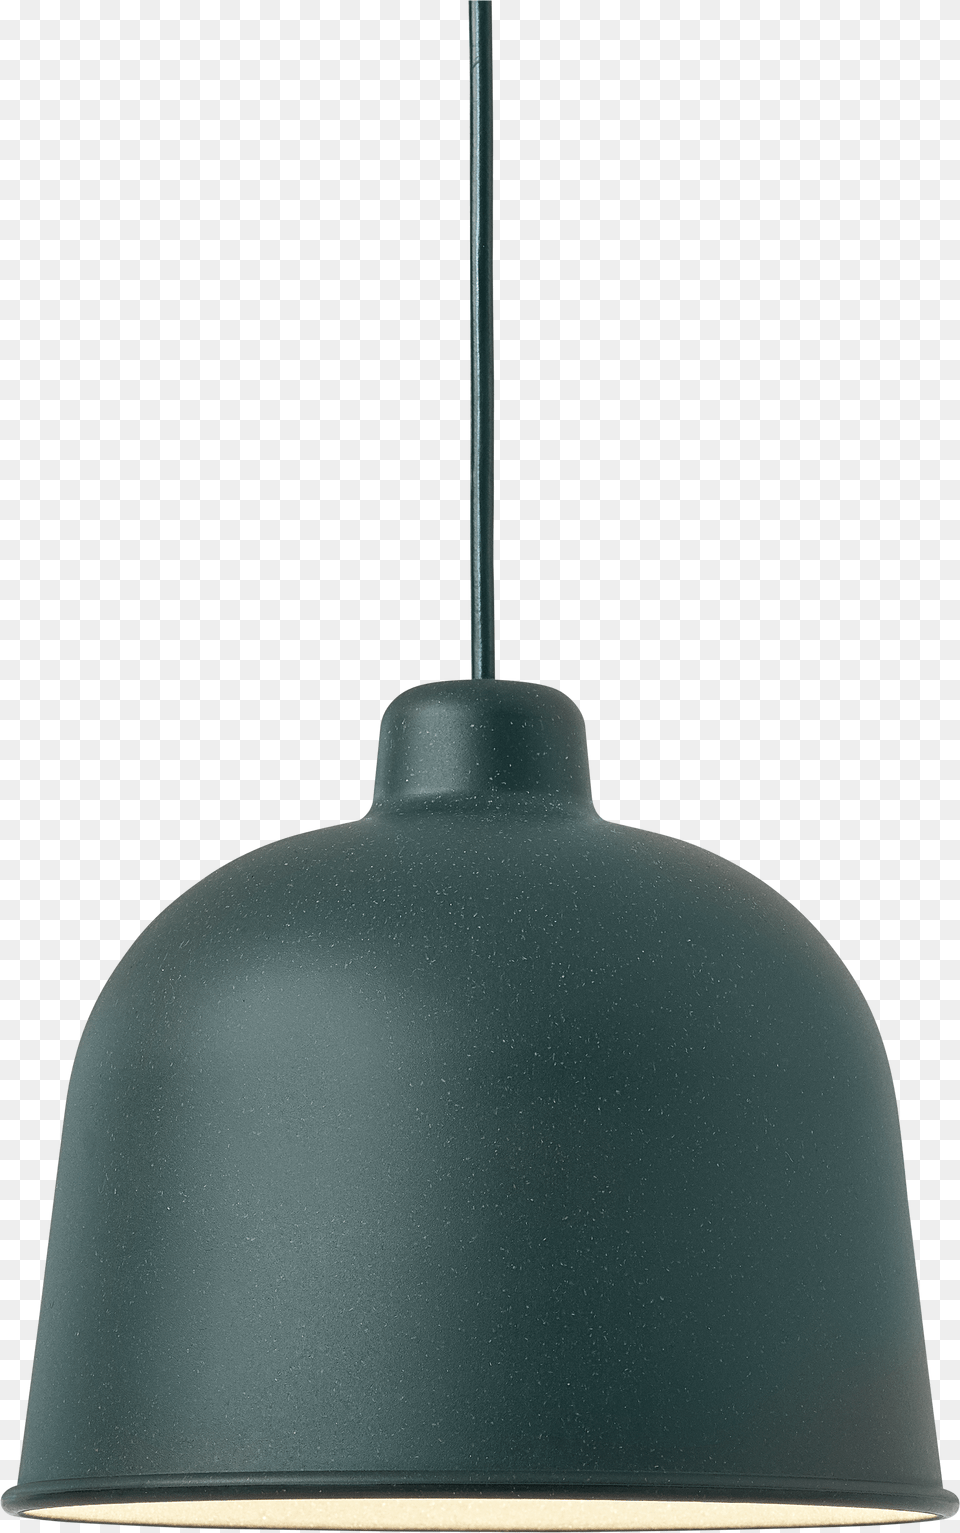 Grain Pendant Lamp A Refreshing Update Of The Classic Hanging Light Bulb Png